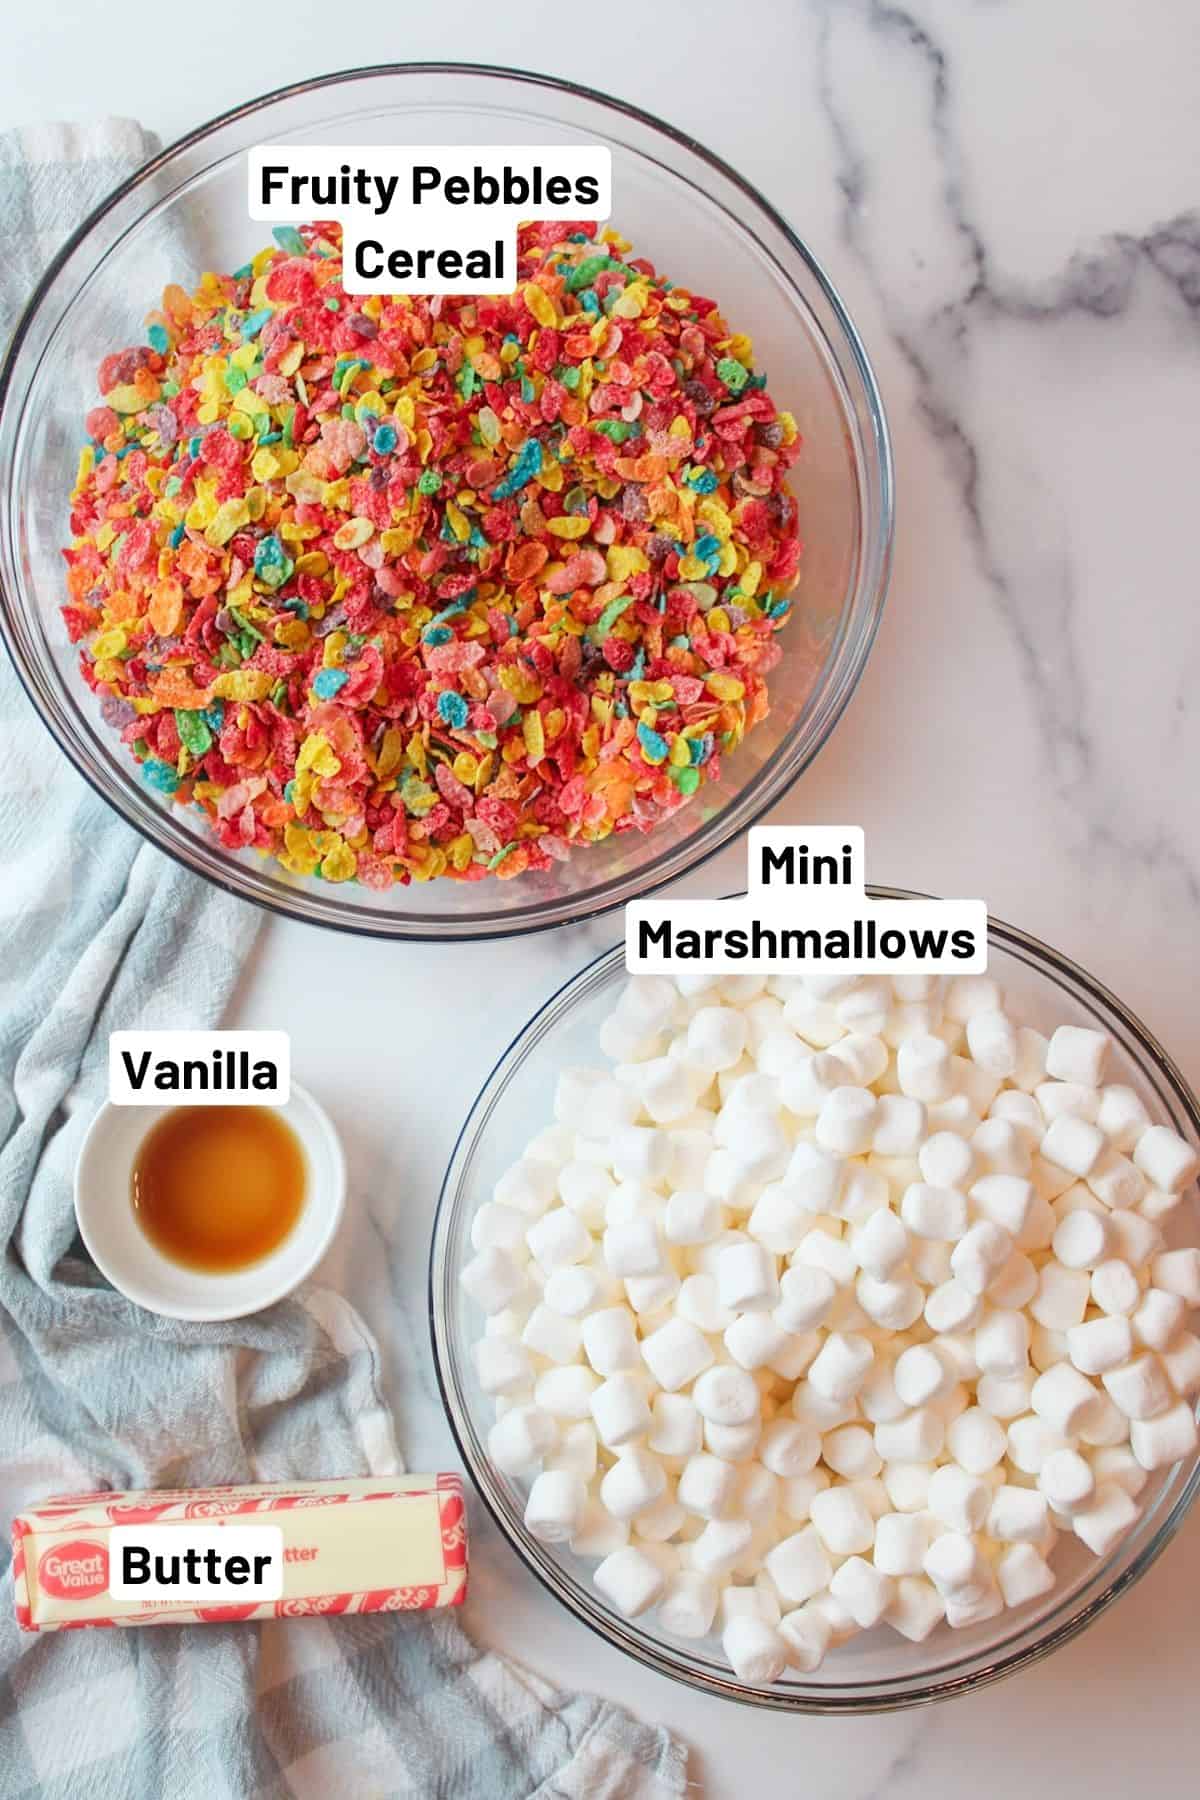 labled ingredients needed to make fruity pebbles treats.